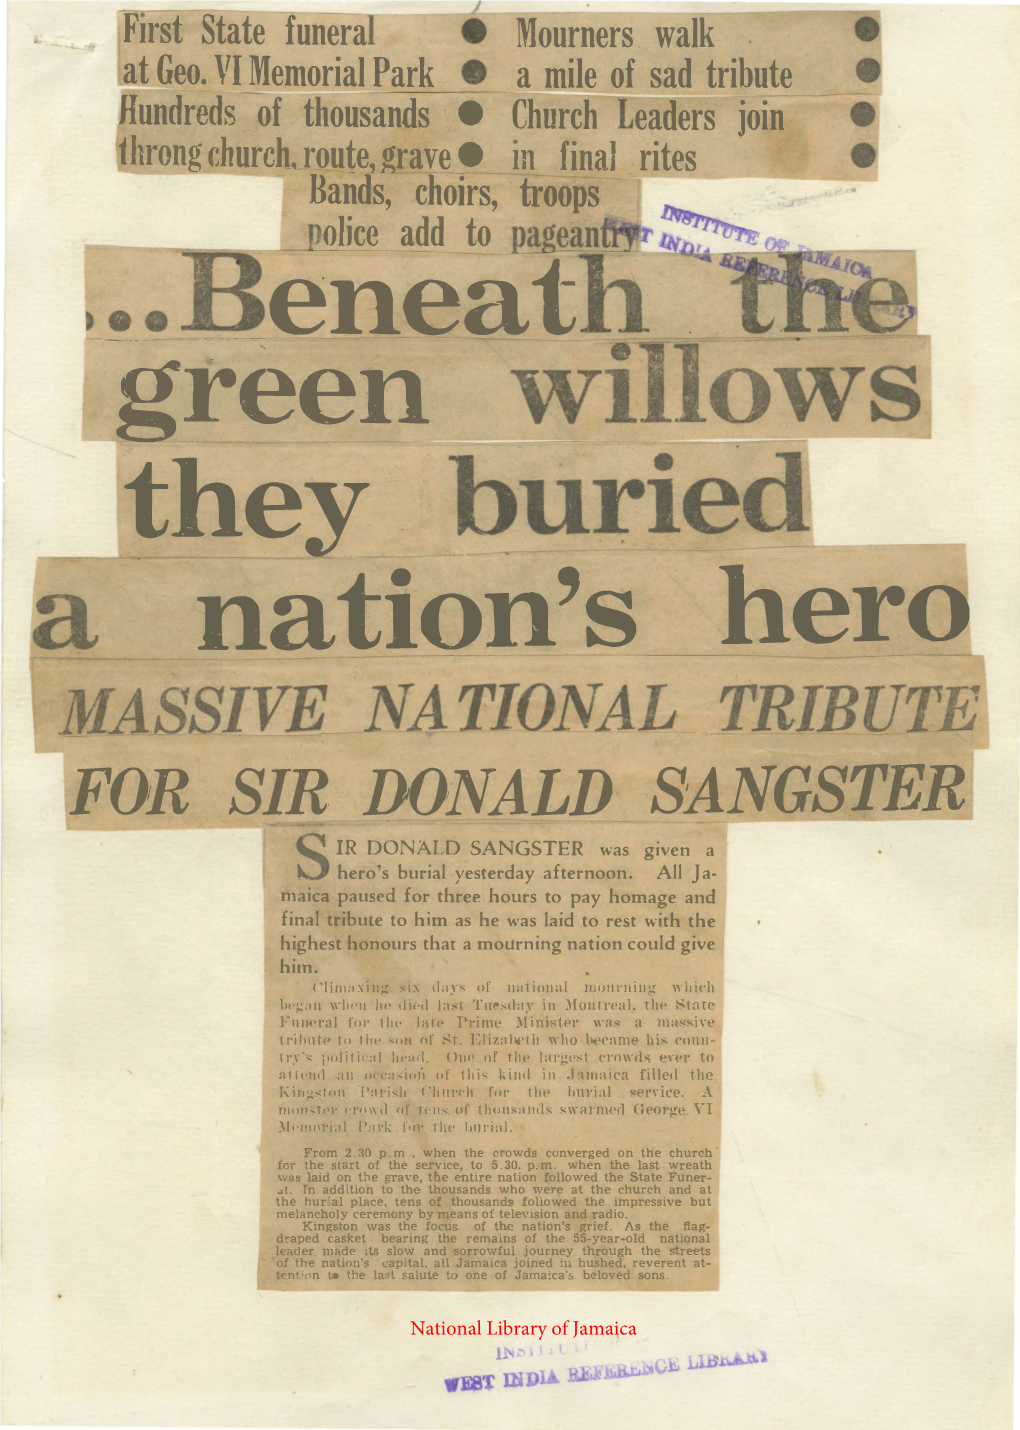 Beneath the Green Willows They Buried a Nations's Hero. Daily Gleaner